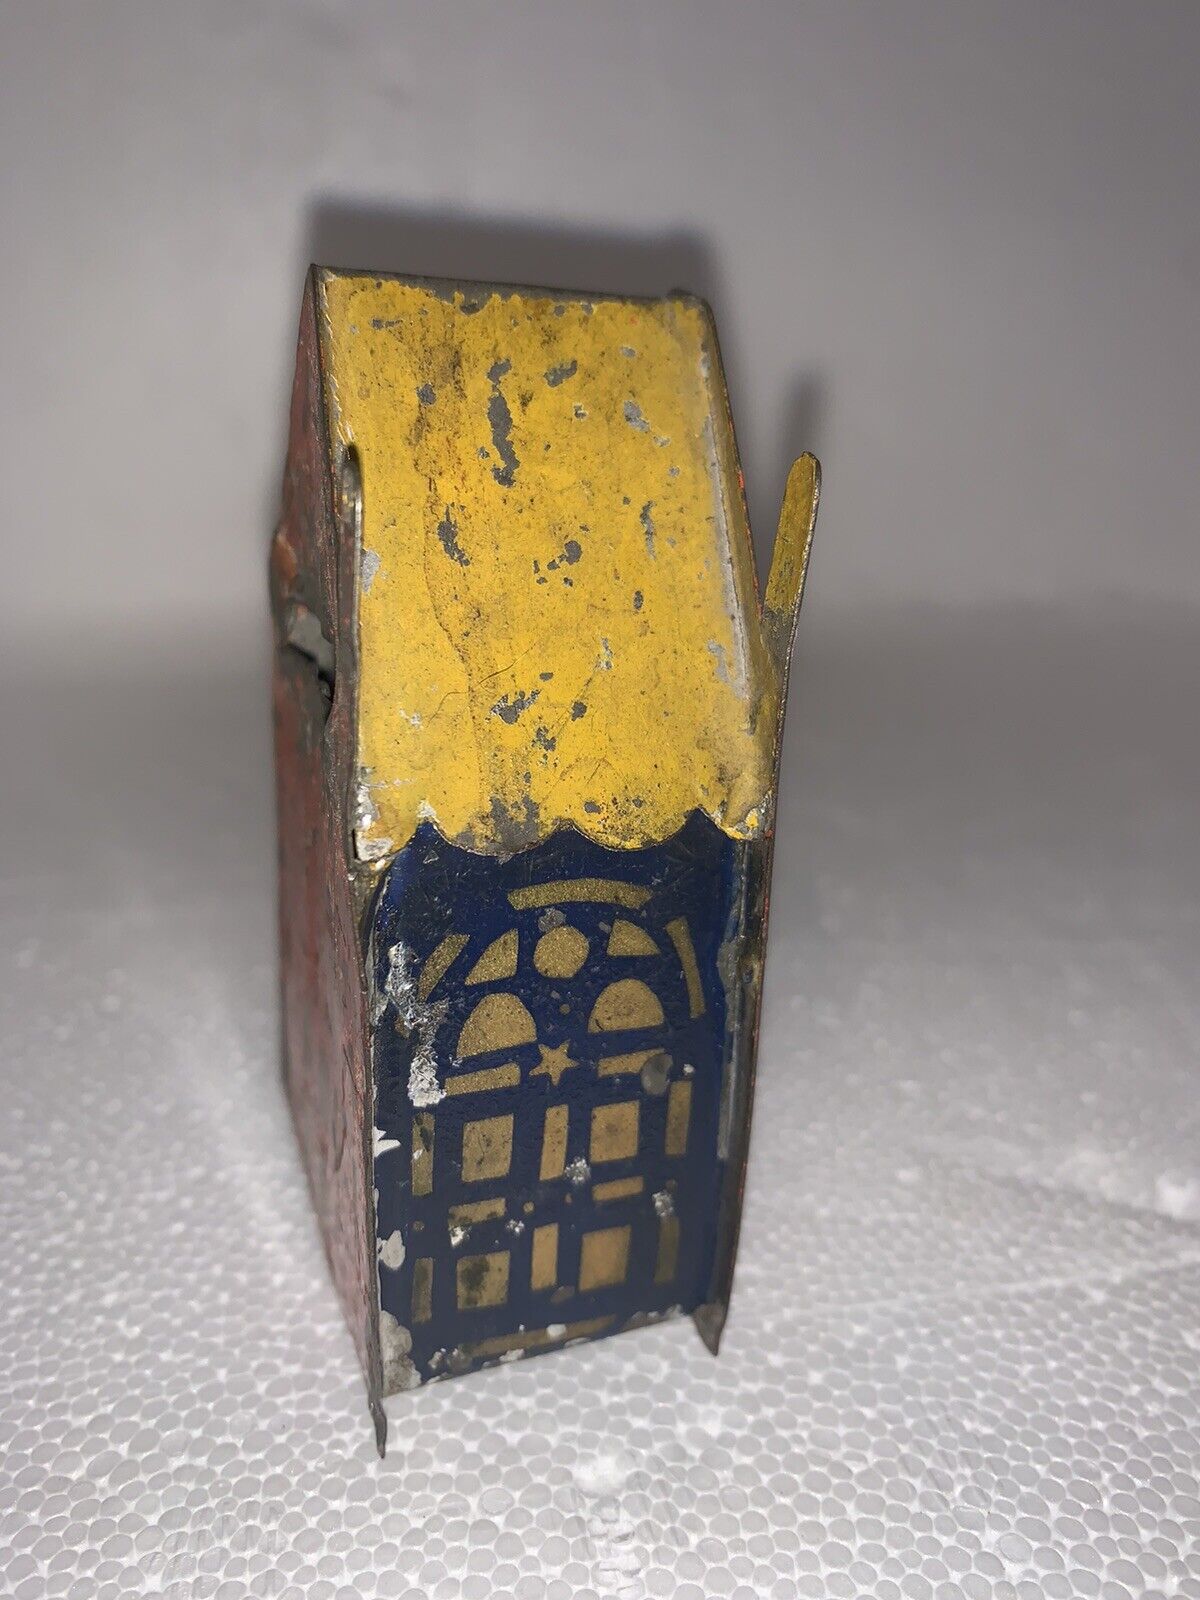 Early American ￼1880s Stenciled Tin Church Penny Bank￼ Gothic￼ Antique Toy￼